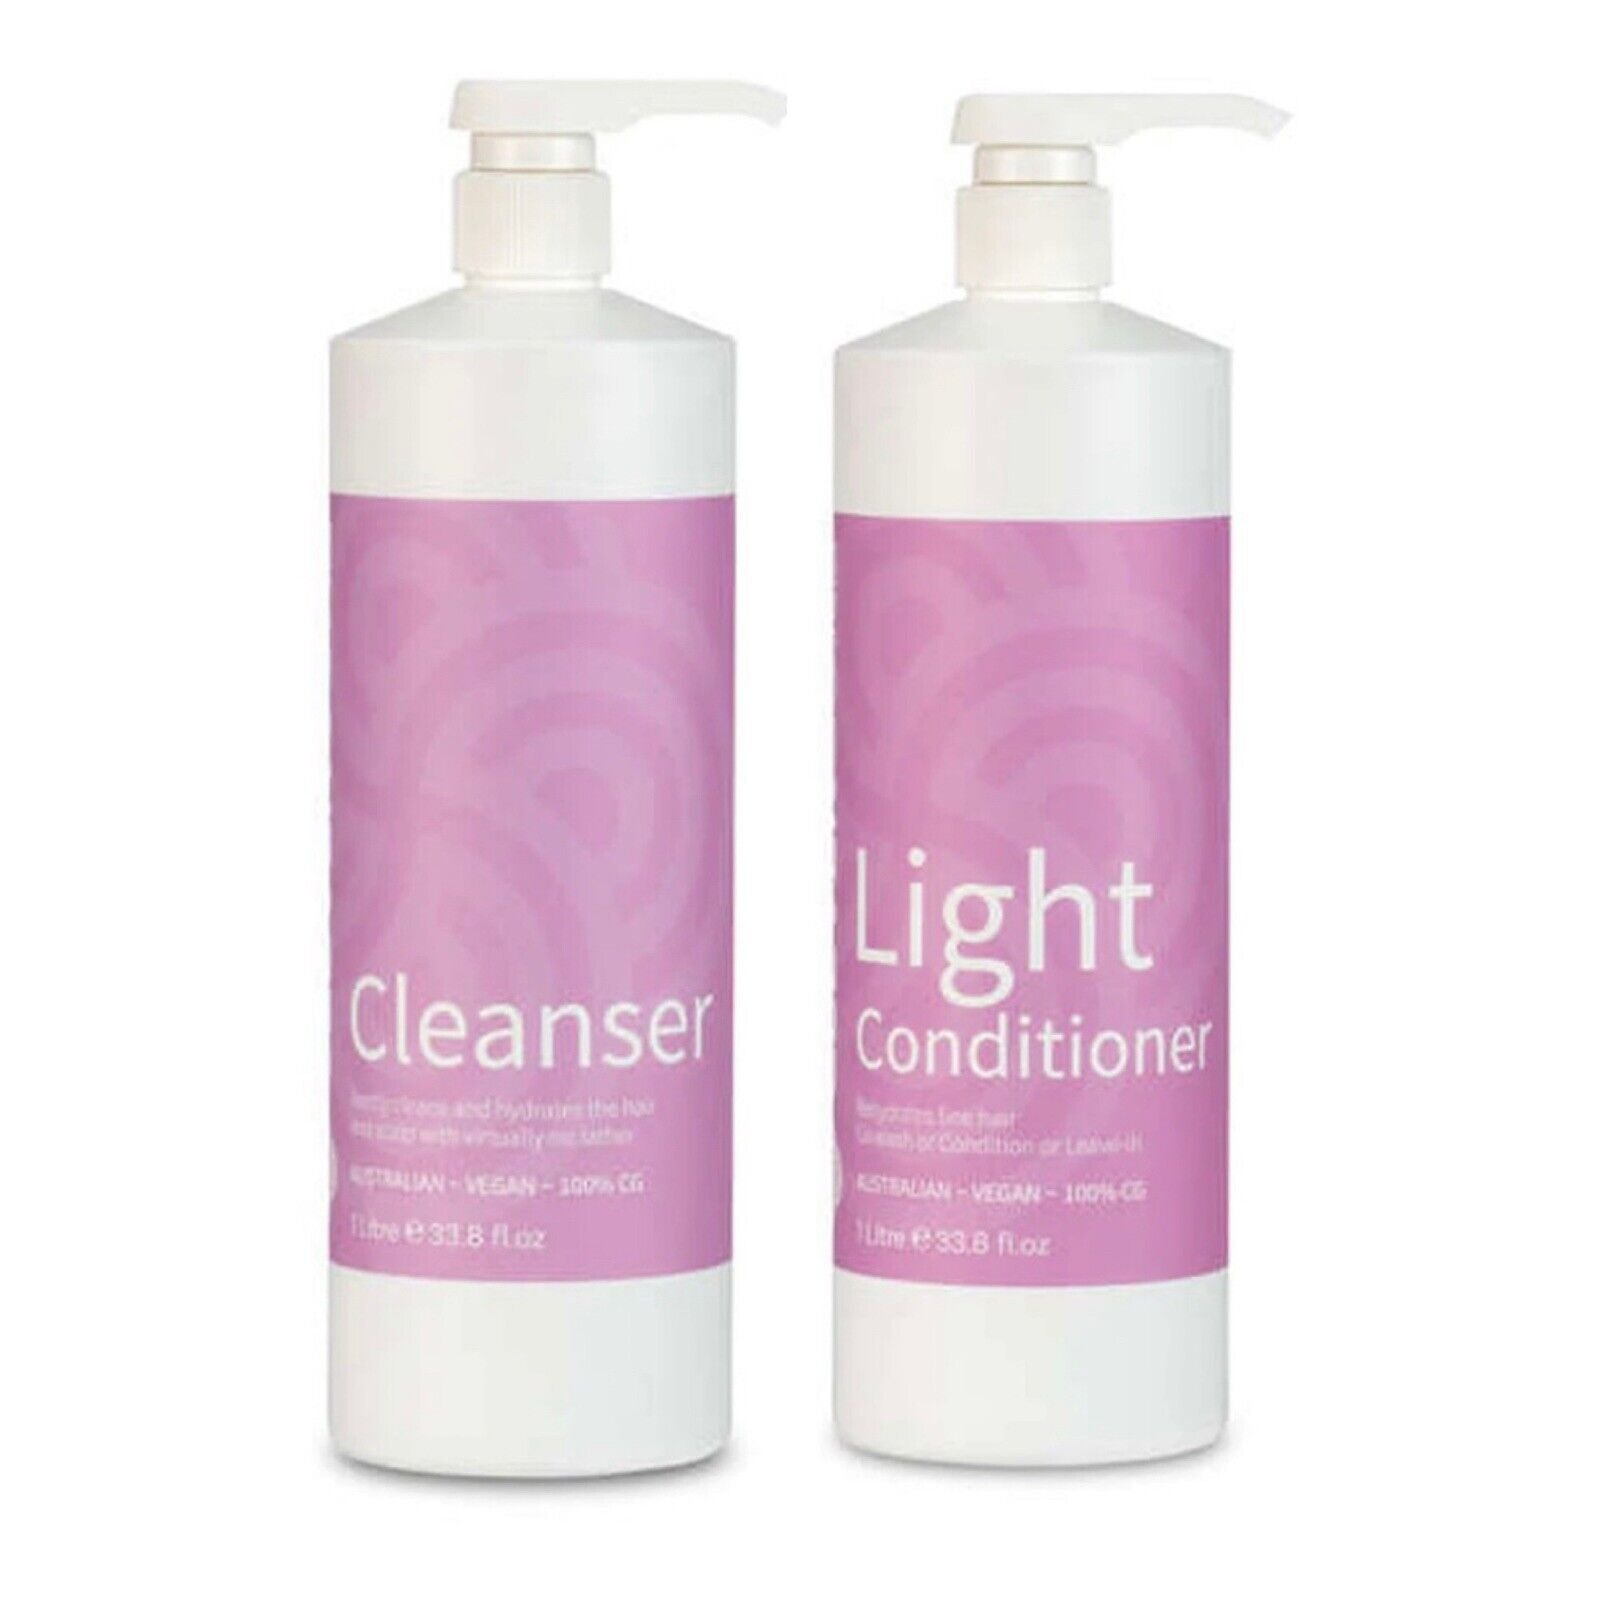 Clever Curl Cleanser Shampoo & Light Conditioner 1000ml 1 Litre Duo